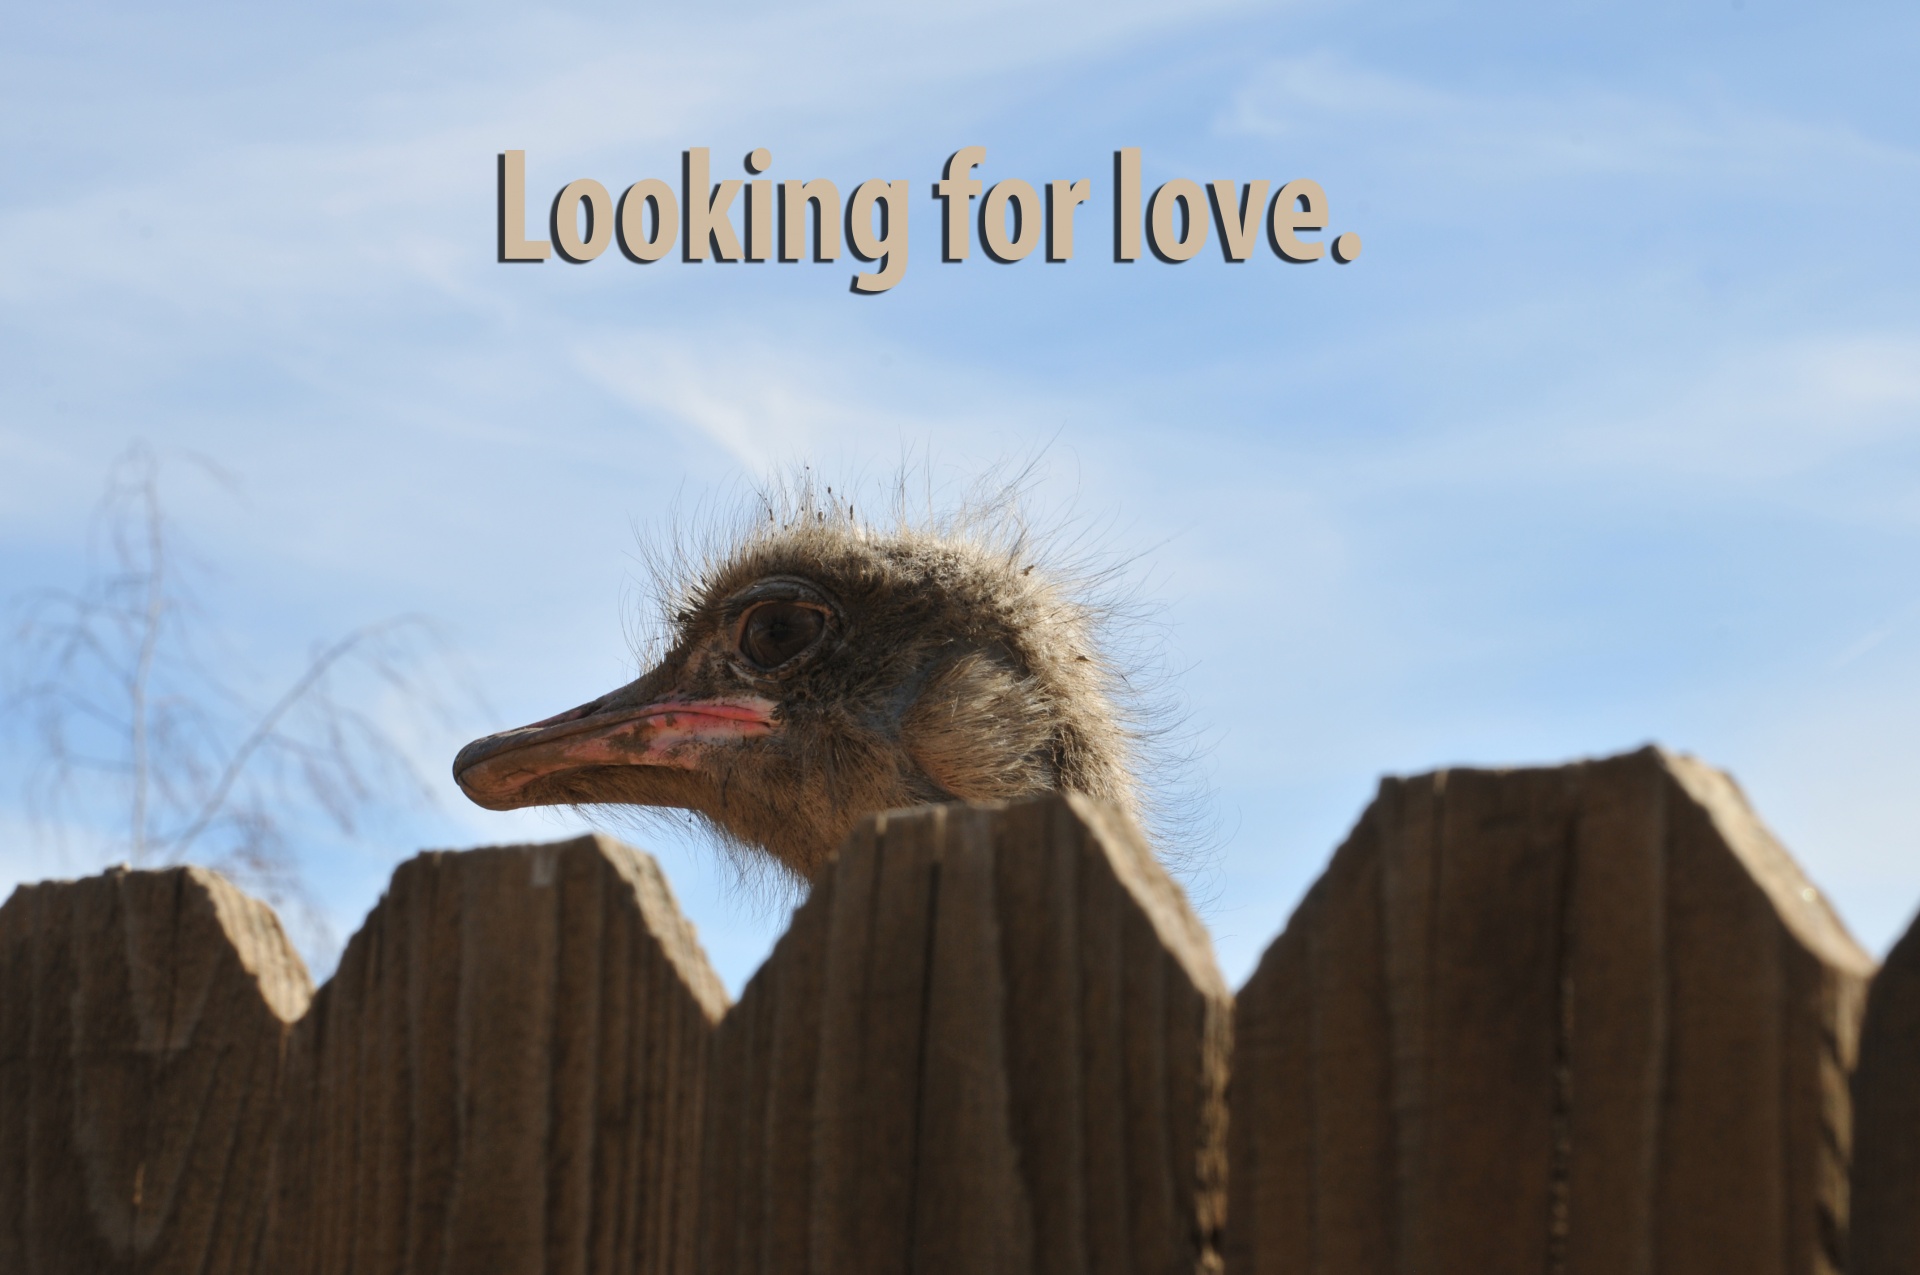 love looking for love ostrich free photo